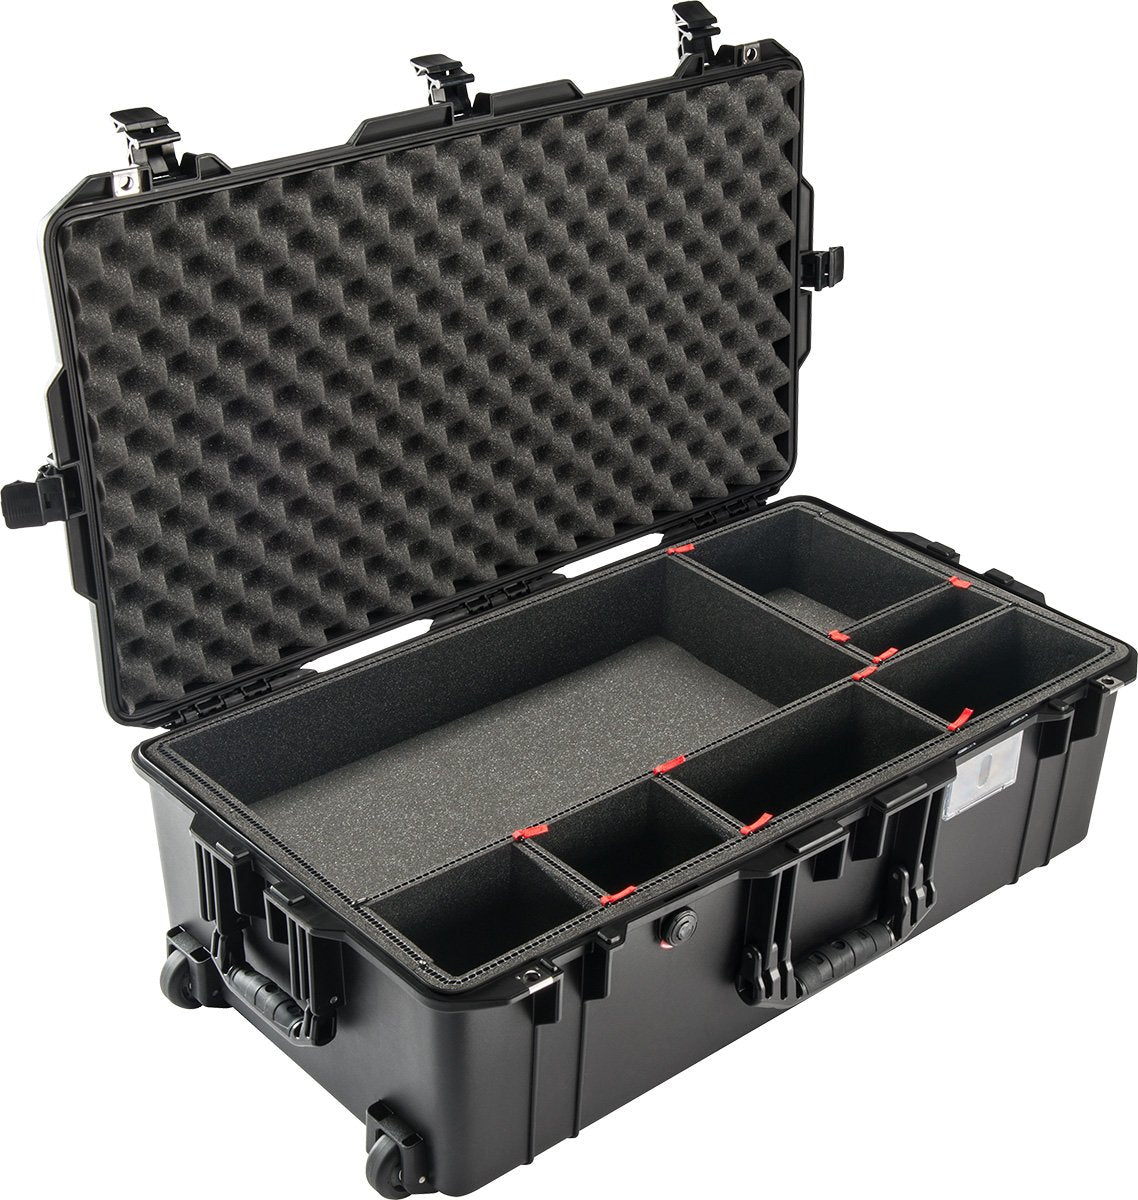 Pelican Protector Case 1615 Air Case - With TrekPak Divider System